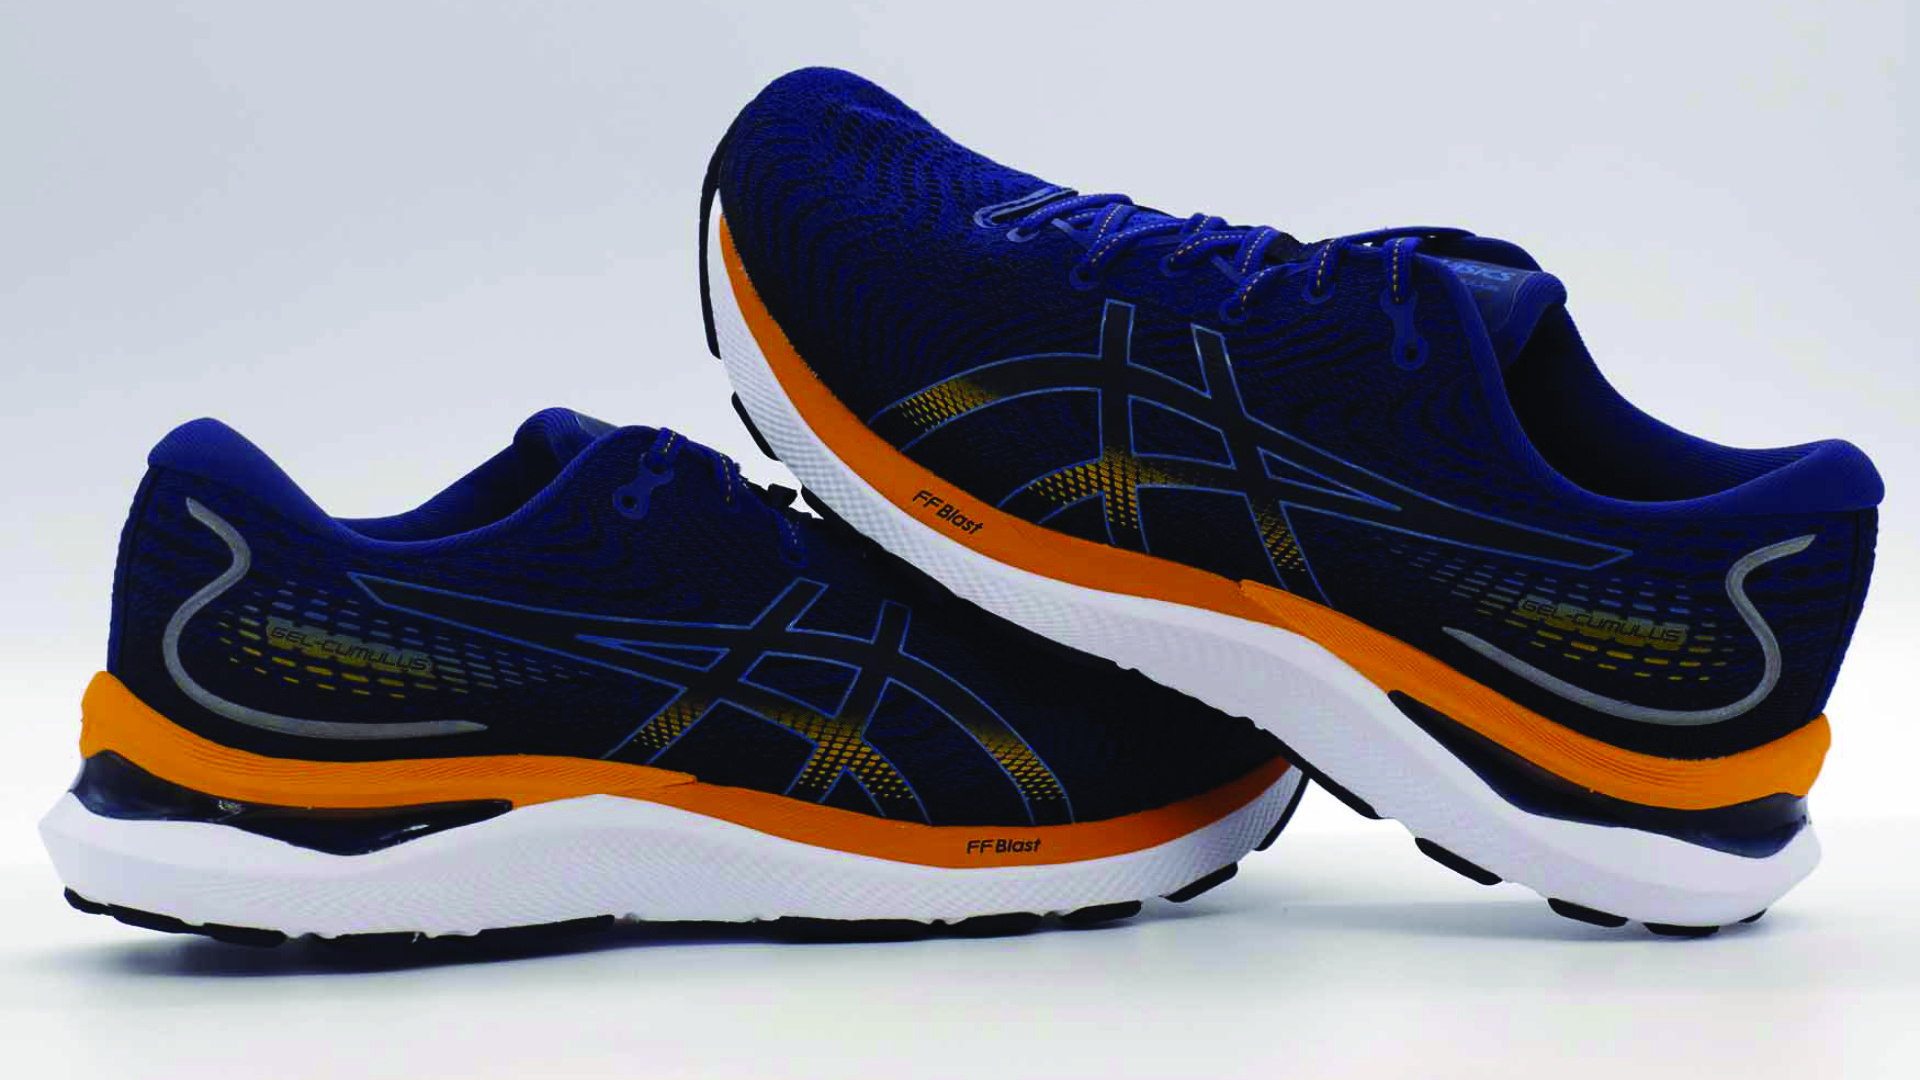 Gel Cumulus 24 - Deep Ocean/Amber Track & Field Running trainers. Great for helping with achilles tendonitis symptoms.